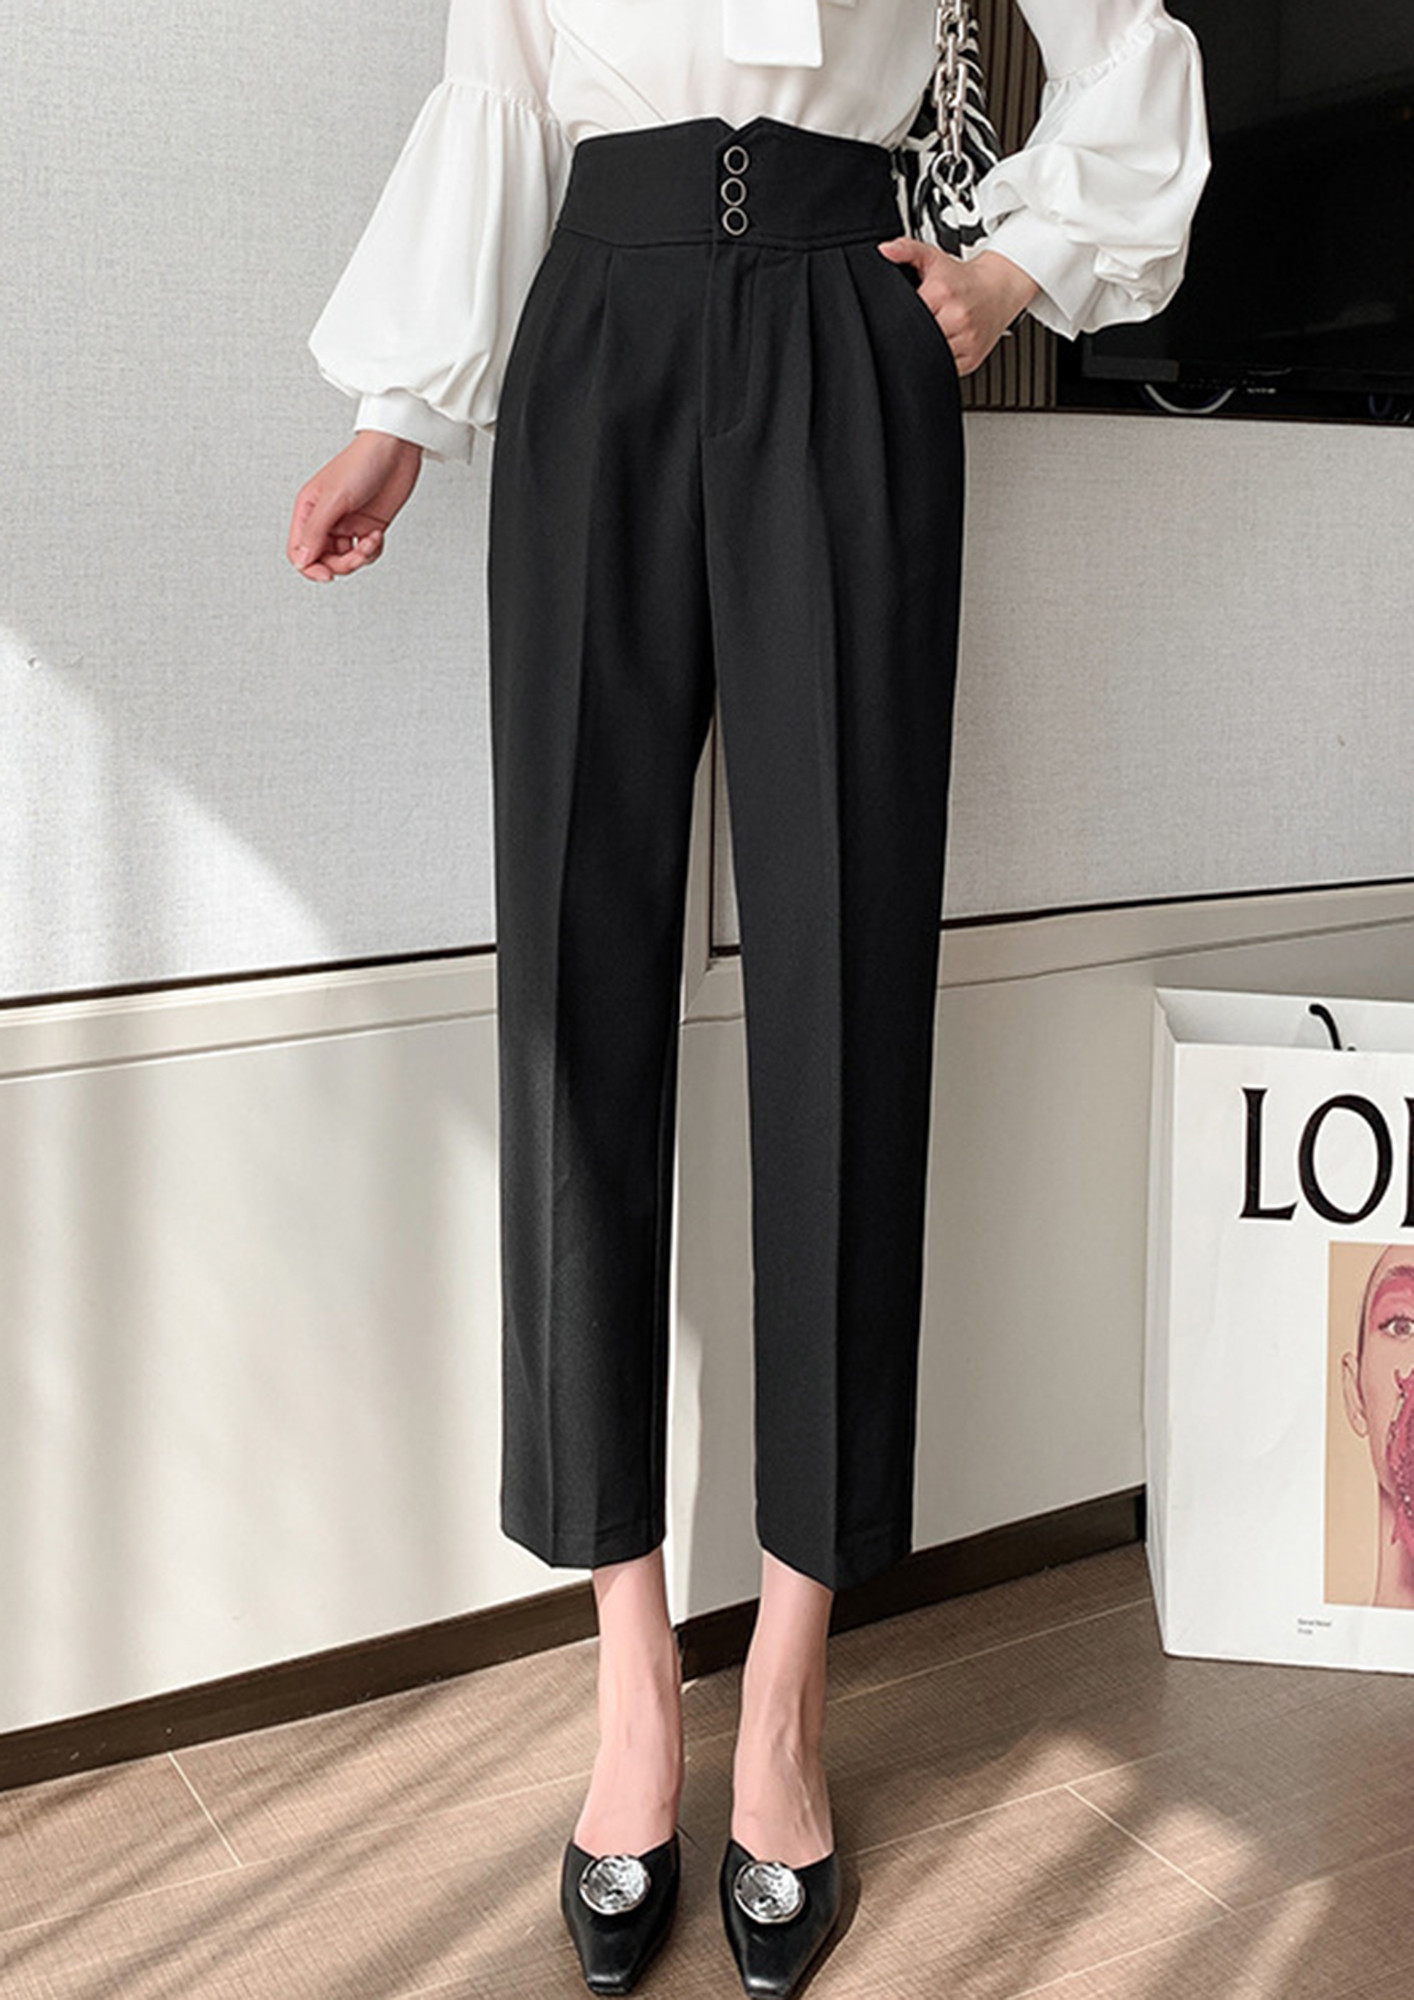 Jeans & Trousers | Black Formal Pants For Women With Attached Belt | Freeup